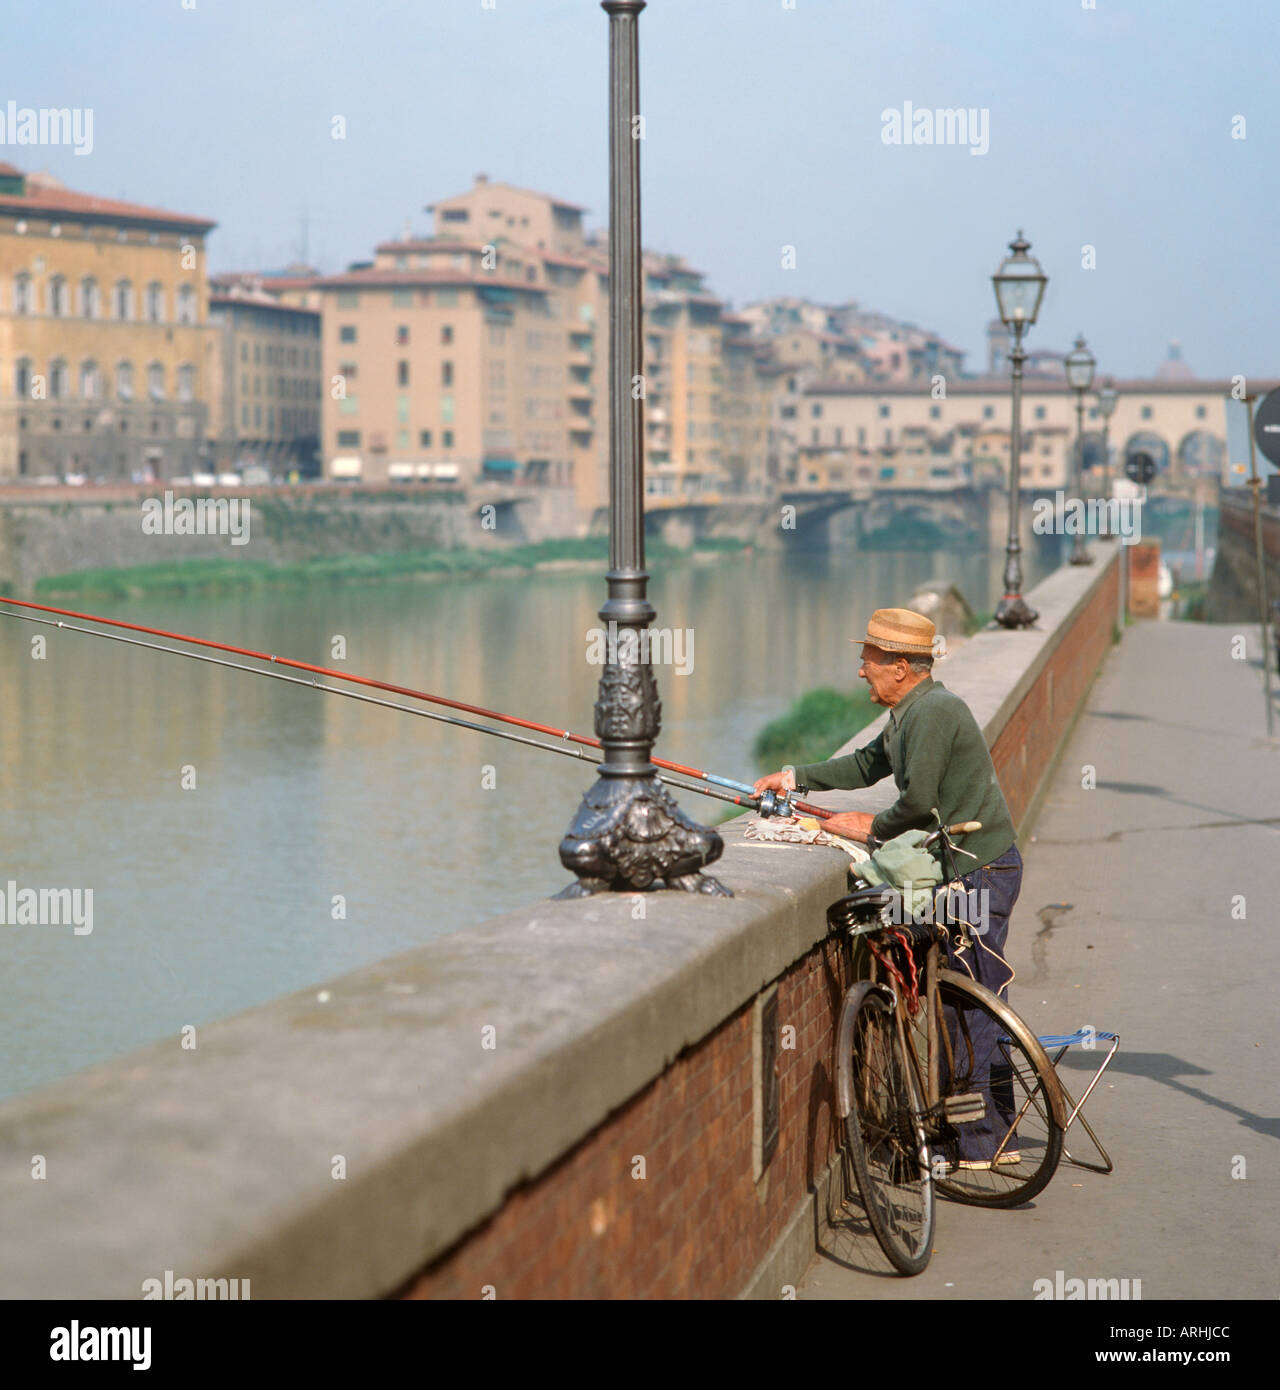 An old man fishing on the banks of the River Arno with the Ponte Vecchio in the distance, Florence, Tuscany, Italy Stock Photo